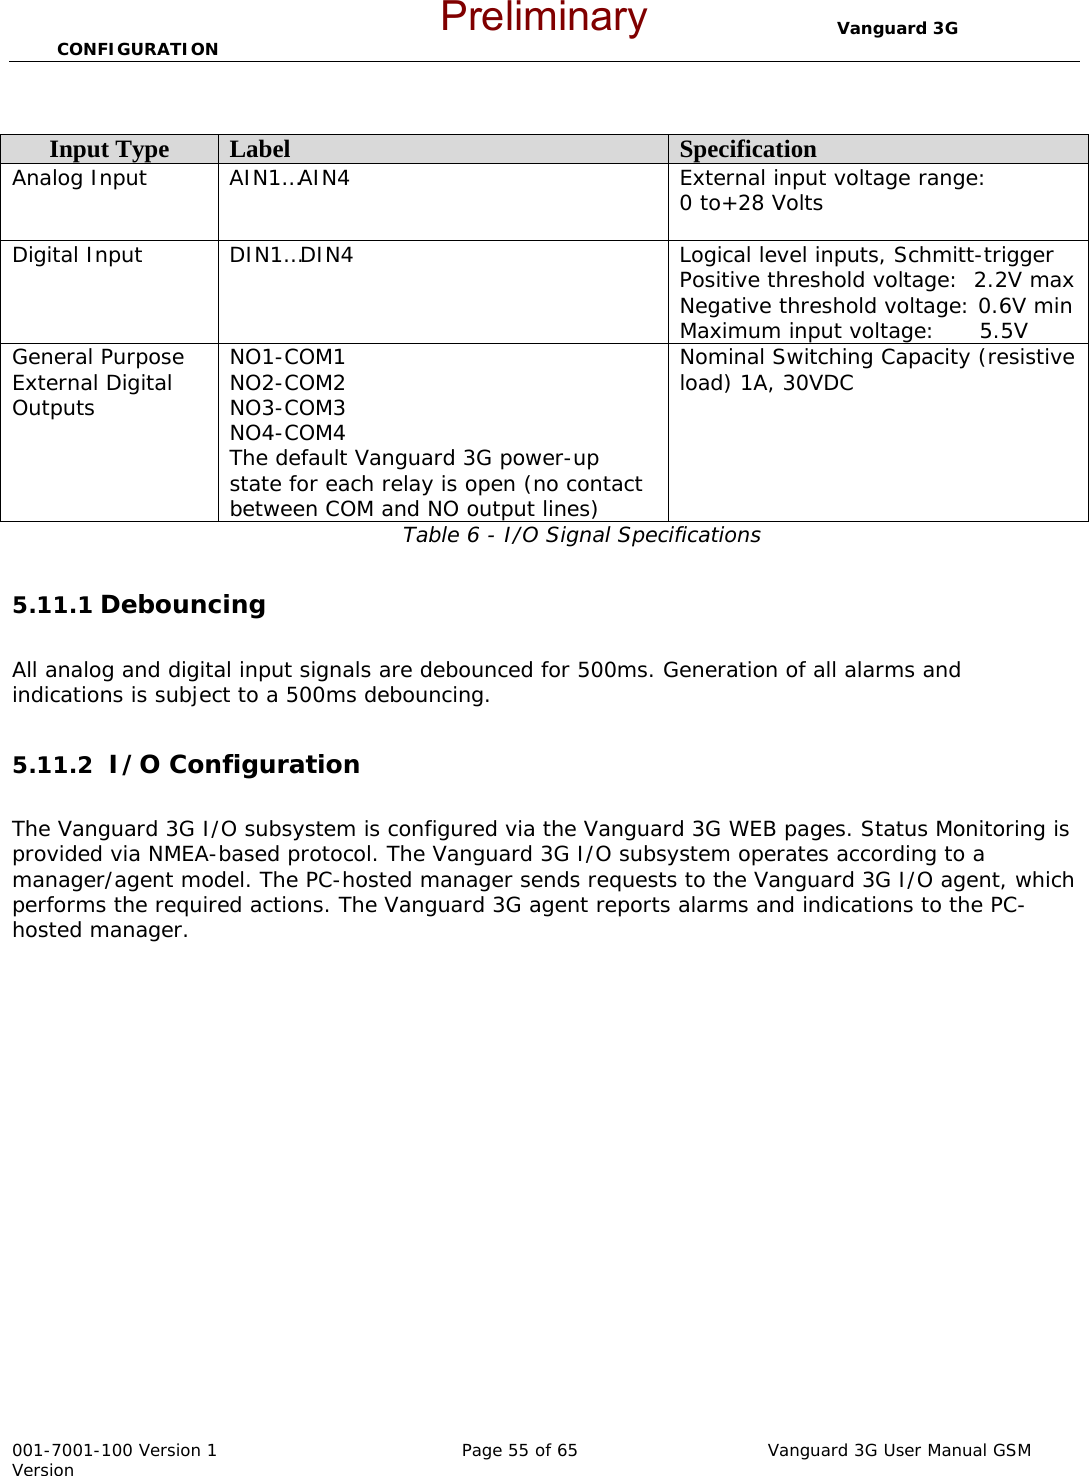                                  Vanguard 3G CONFIGURATION  001-7001-100 Version 1       Page 55 of 65       Vanguard 3G User Manual GSM Version  Table 6 - I/O Signal Specifications  5.11.1 Debouncing     All analog and digital input signals are debounced for 500ms. Generation of all alarms and indications is subject to a 500ms debouncing.  5.11.2  I/O Configuration  The Vanguard 3G I/O subsystem is configured via the Vanguard 3G WEB pages. Status Monitoring is provided via NMEA-based protocol. The Vanguard 3G I/O subsystem operates according to a manager/agent model. The PC-hosted manager sends requests to the Vanguard 3G I/O agent, which performs the required actions. The Vanguard 3G agent reports alarms and indications to the PC-hosted manager. Input Type  Label  Specification Analog Input  AIN1…AIN4  External input voltage range: 0 to+28 Volts  Digital Input  DIN1…DIN4  Logical level inputs, Schmitt-trigger Positive threshold voltage:  2.2V max Negative threshold voltage: 0.6V min Maximum input voltage:      5.5V General Purpose External Digital Outputs NO1-COM1 NO2-COM2 NO3-COM3 NO4-COM4 The default Vanguard 3G power-up state for each relay is open (no contact between COM and NO output lines) Nominal Switching Capacity (resistive load) 1A, 30VDC  Preliminary